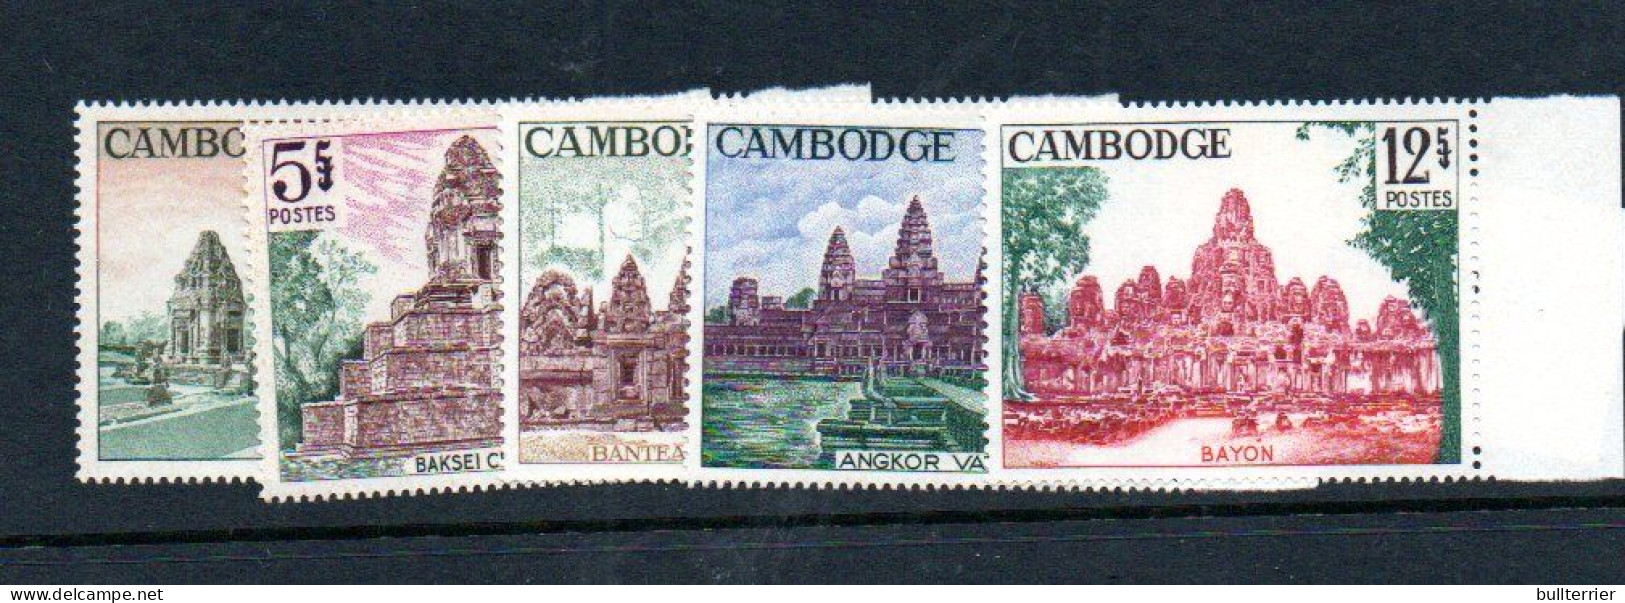 CAMBODIA - 1966 - TEMPLES SET OF 6  MINT NEVER HINGED - Cambodge